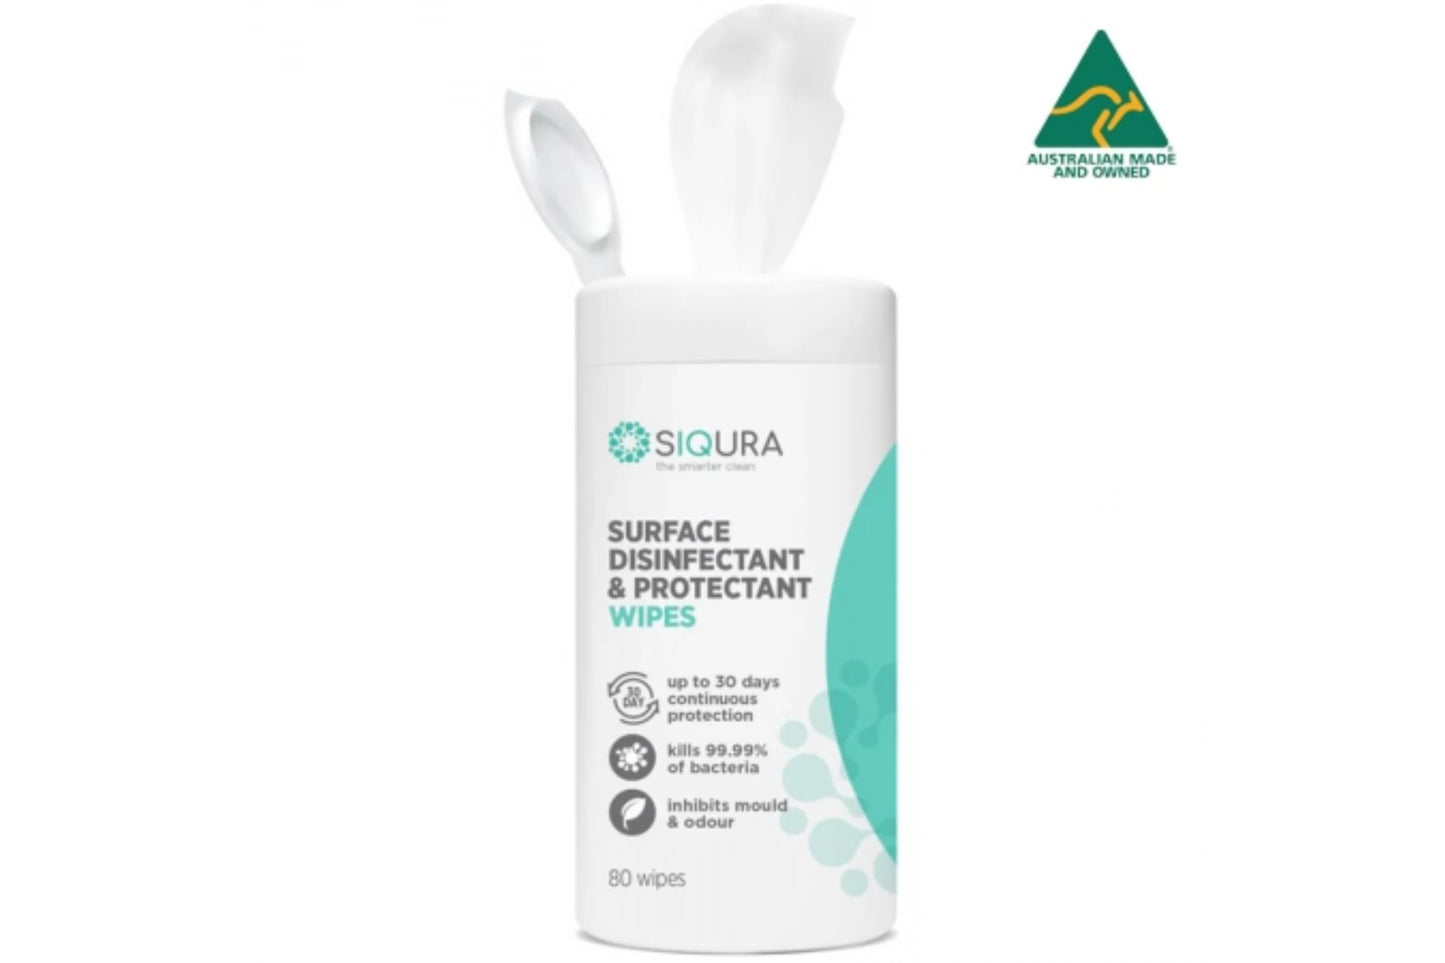 Siqura Surface Disinfectant & Protectant Wipes *Australian Made* 80 Wipes/Canister